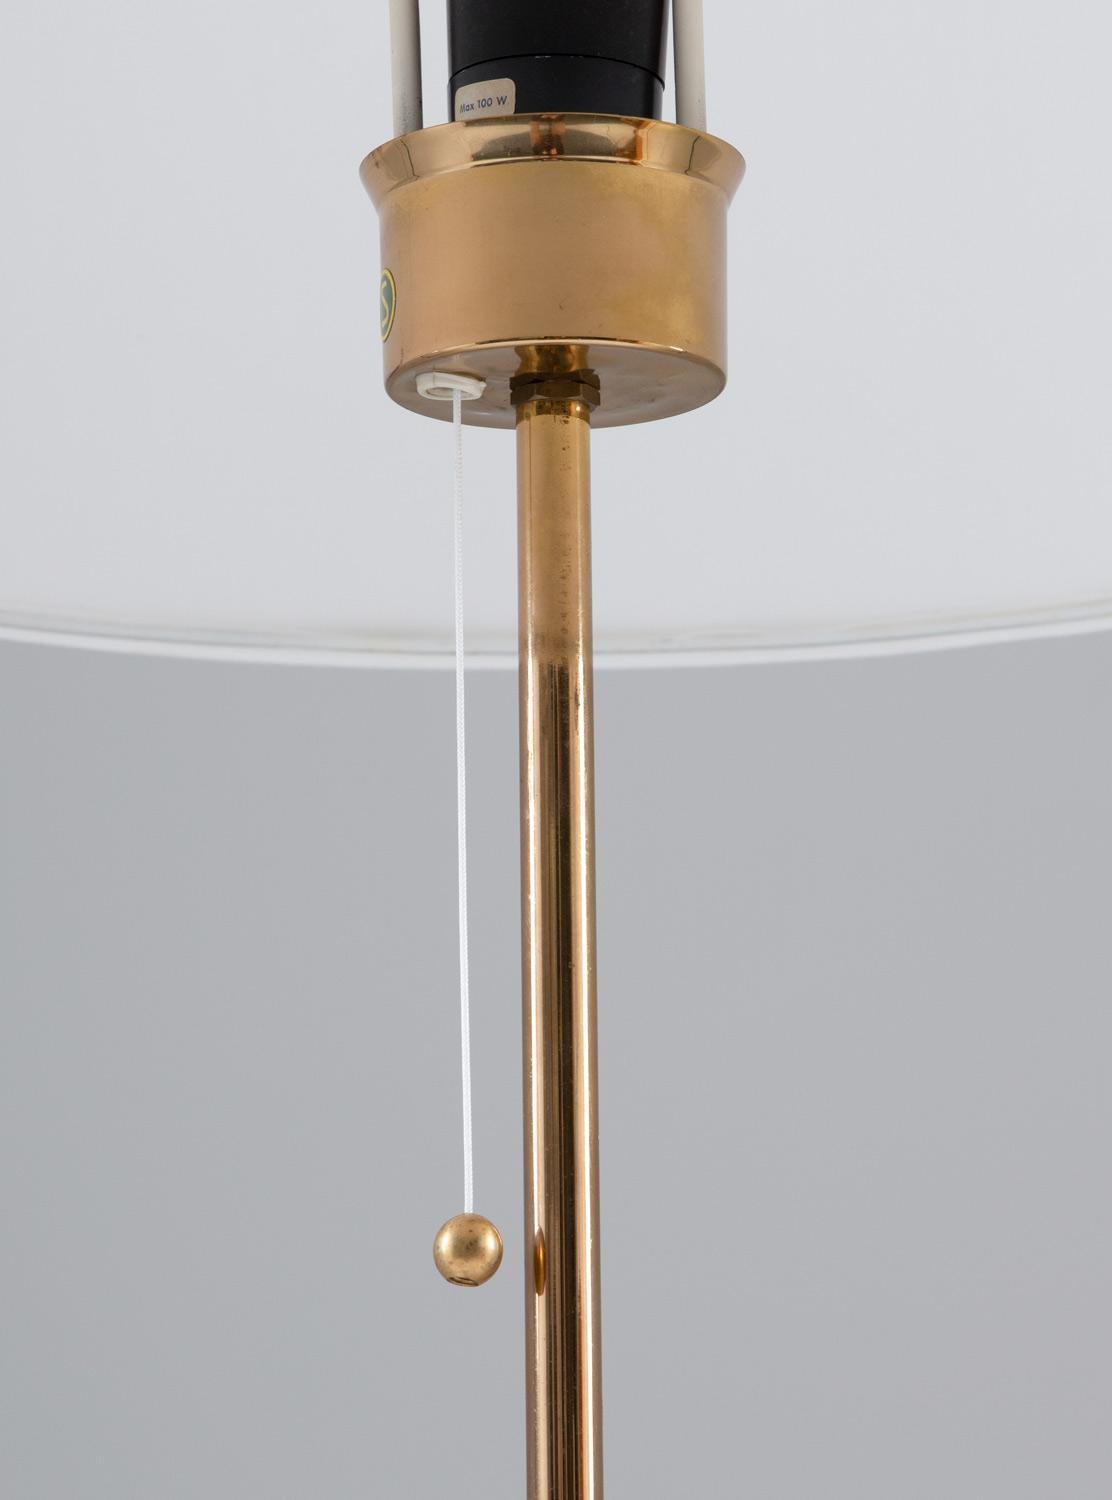 Scandinavian Midcentury Floor Lamp in Brass and Leather by Bergboms, Sweden For Sale 1